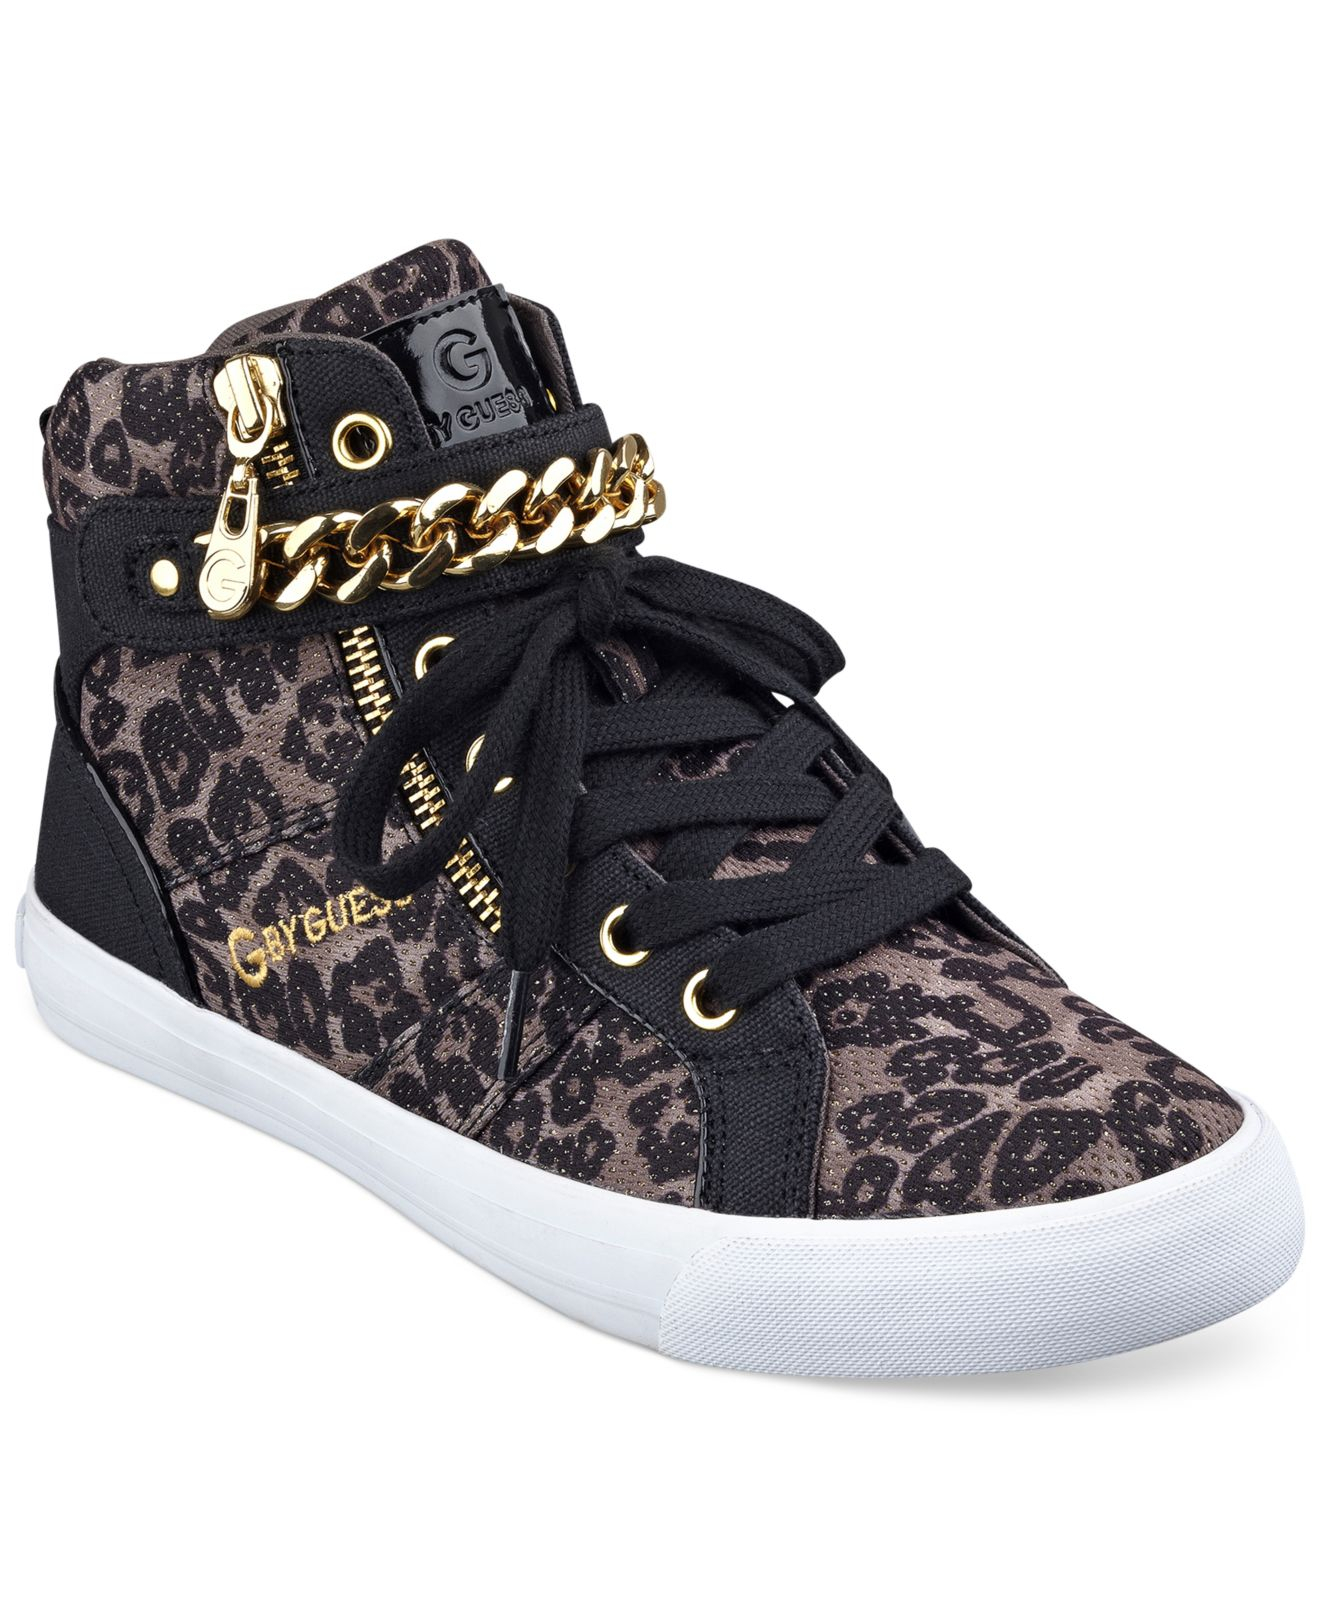 G by guess Women'S Orvan High Top Chain Sneakers | Lyst